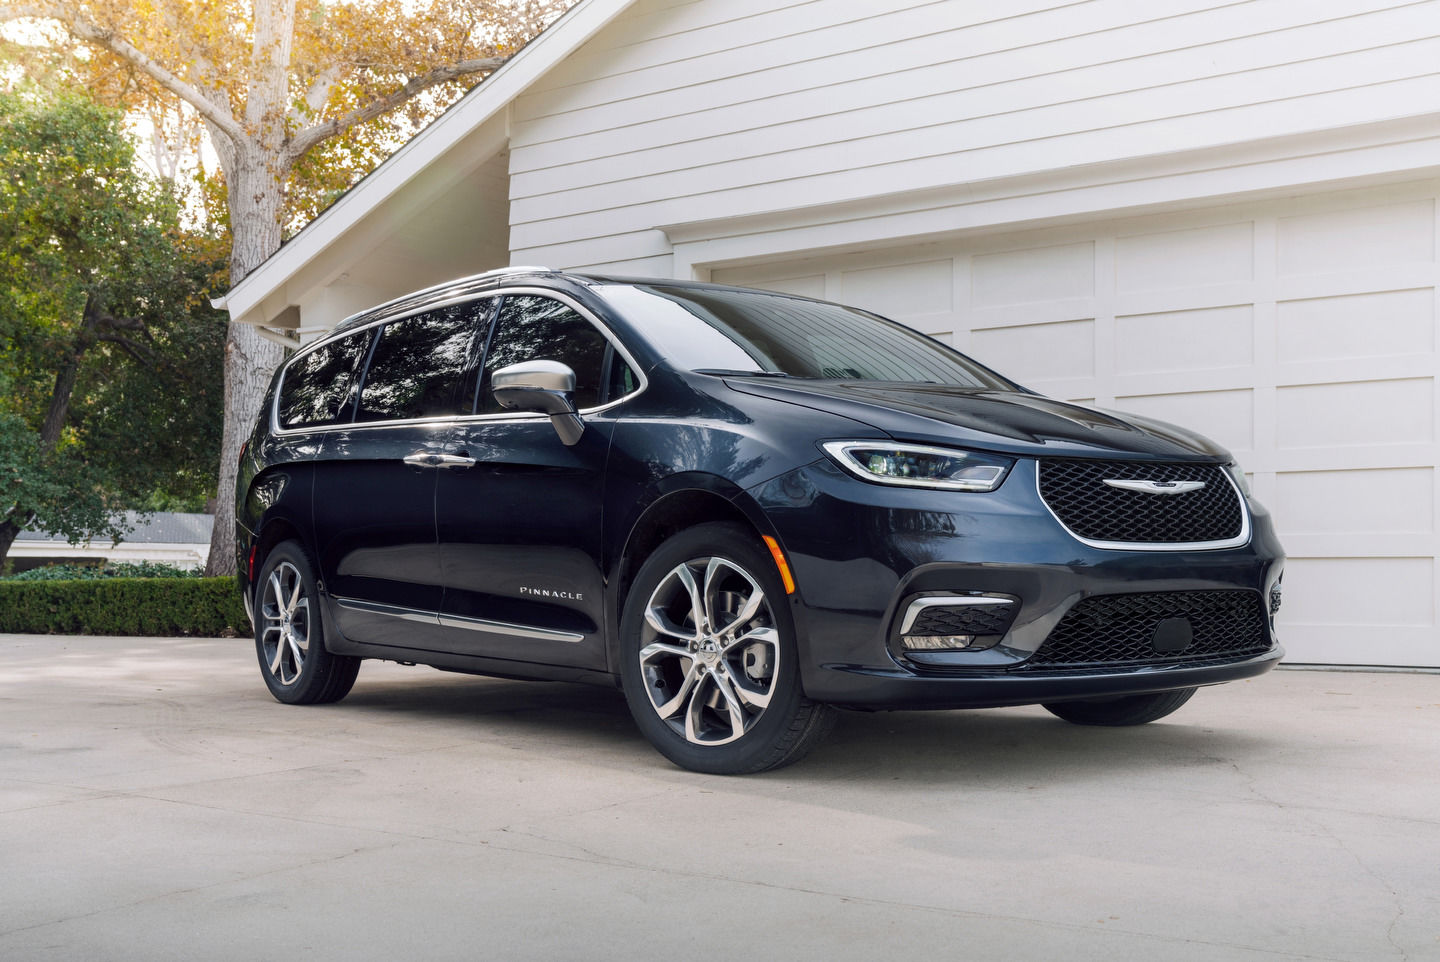 Chrysler Pacifica receives highest possible rating for its safety